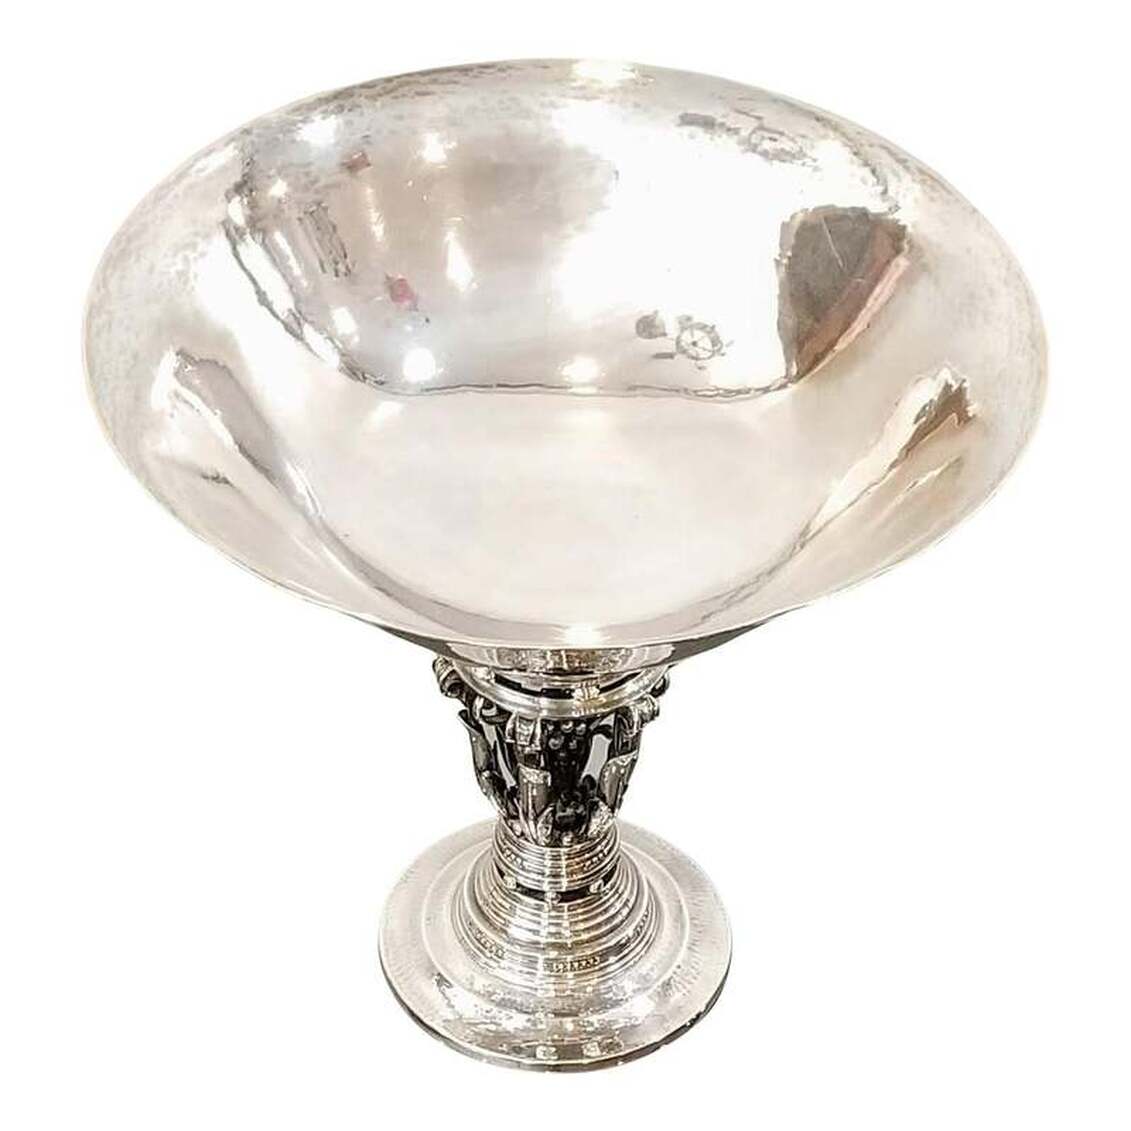 Johan Rohde designed sterling silver compote crafted by Georg Jensen A/S ( Georg Jensen Sølvsmedie), Copenhagen, Denmark.  The Scandinavian Art Nouveau Danish Silver Centerpiece Pedestal Bowl known as The Princess Bowl was created as a complementary piece to the larger 